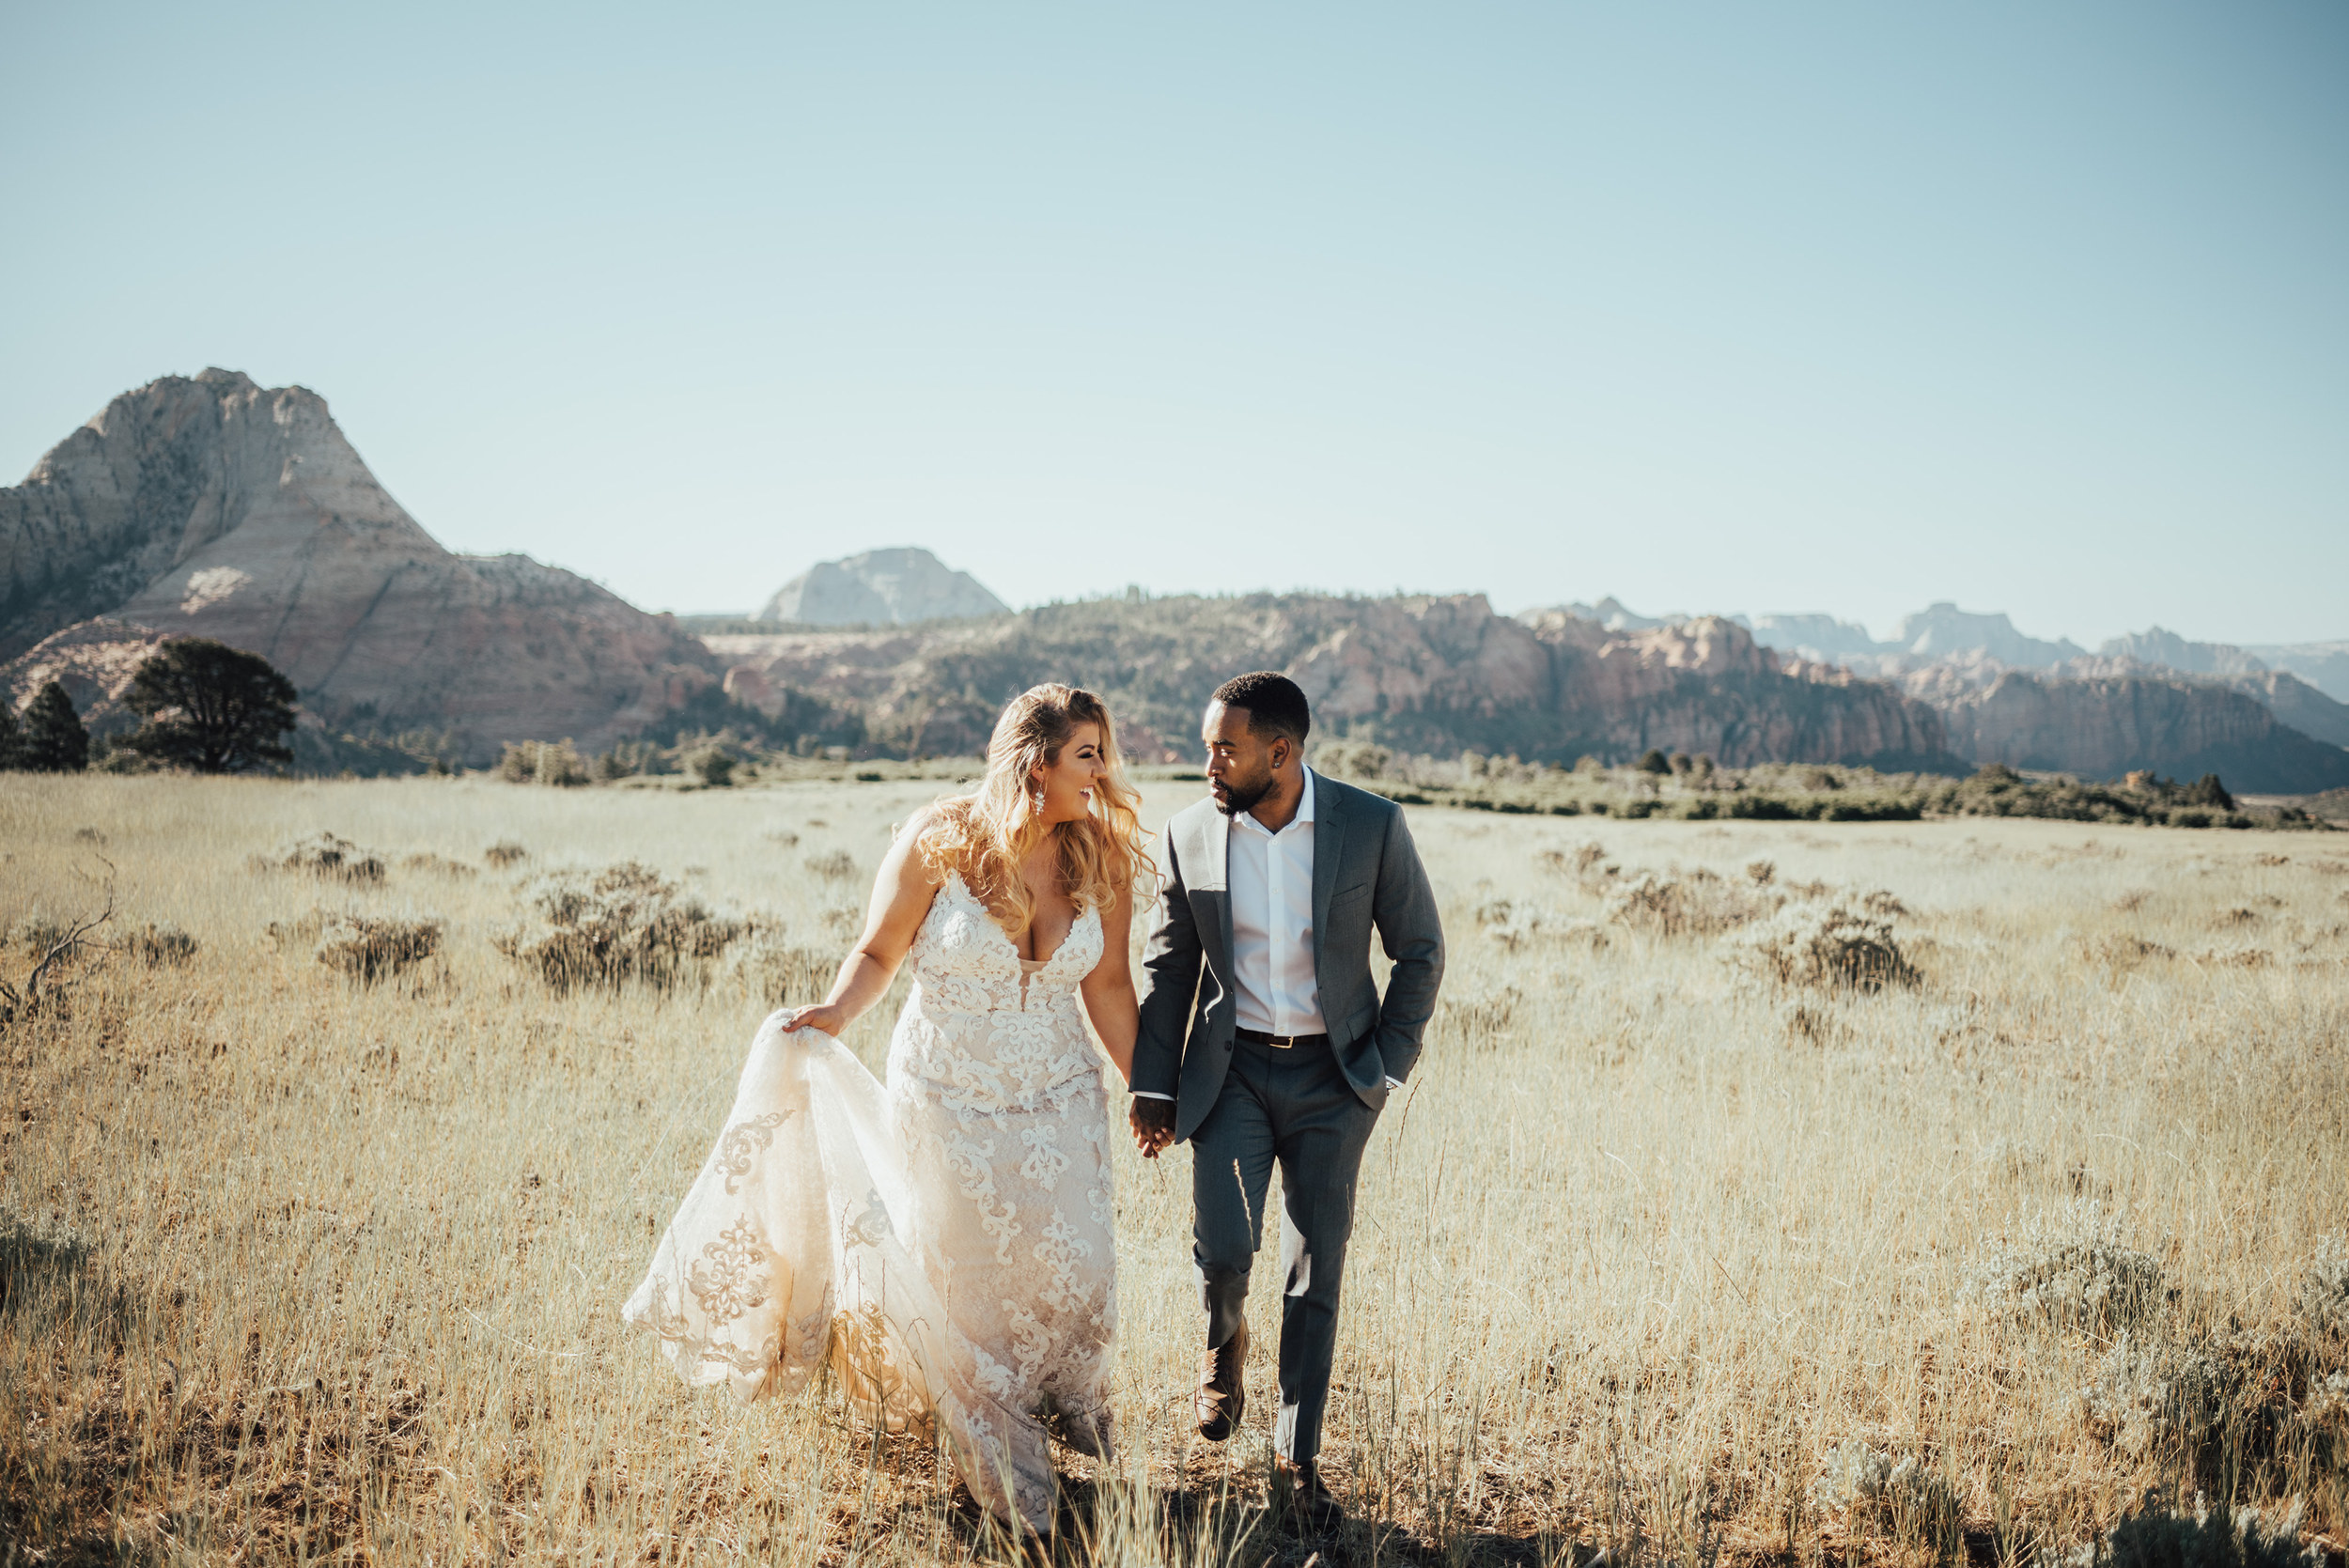 savannah-bridal-shop-ivory-and-beau-maggie-sottero-bride-tuscany-lynette-zion-national-park-wedding-utah-wedding-savannah-wedding-dresses-savannah-wedding-gowns-ashley-smith-photography-vanilla-and-the-bean-20.JPG